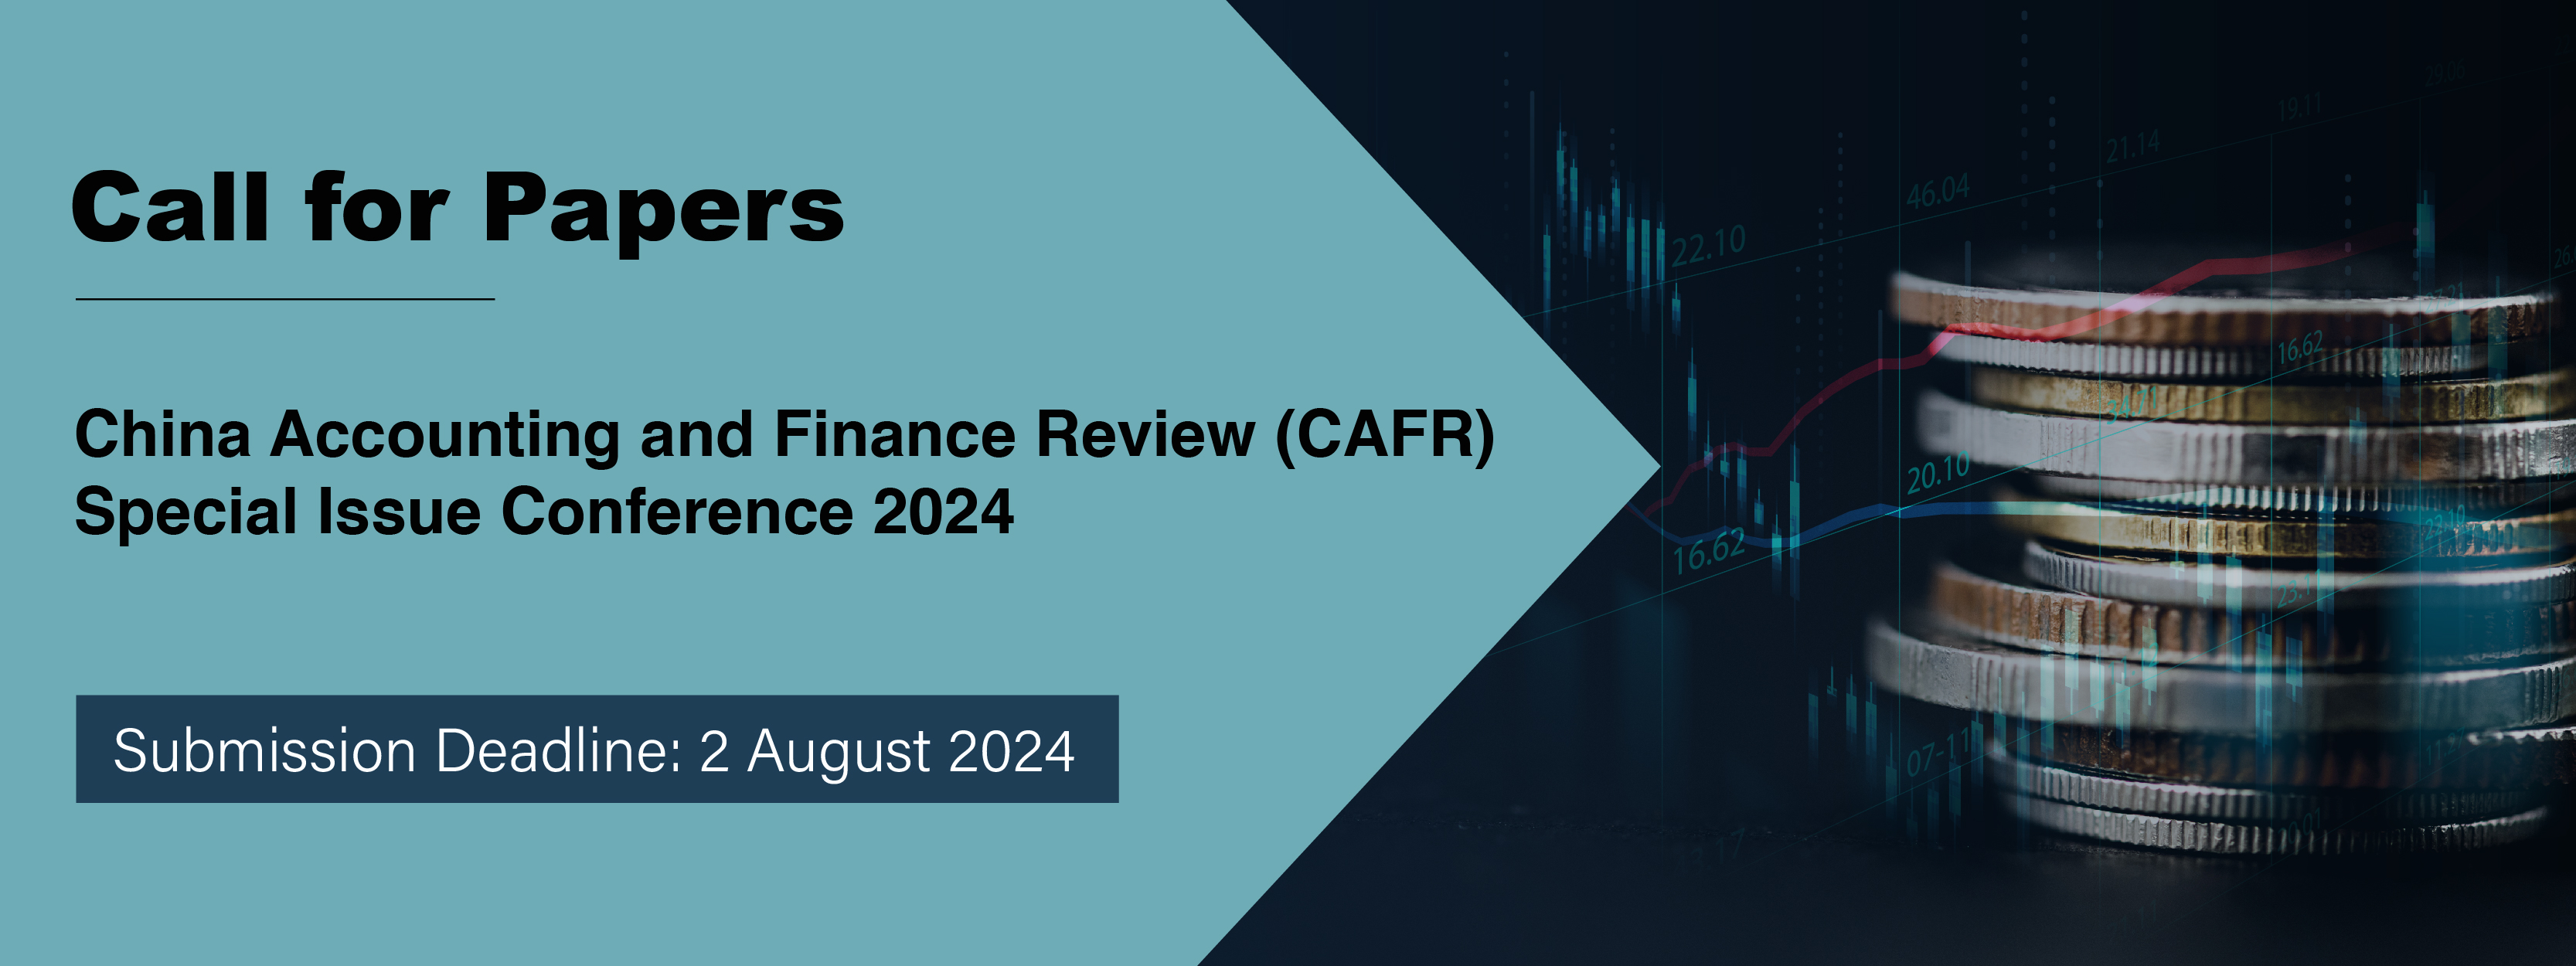 CAFR Special Issue Conference 2024